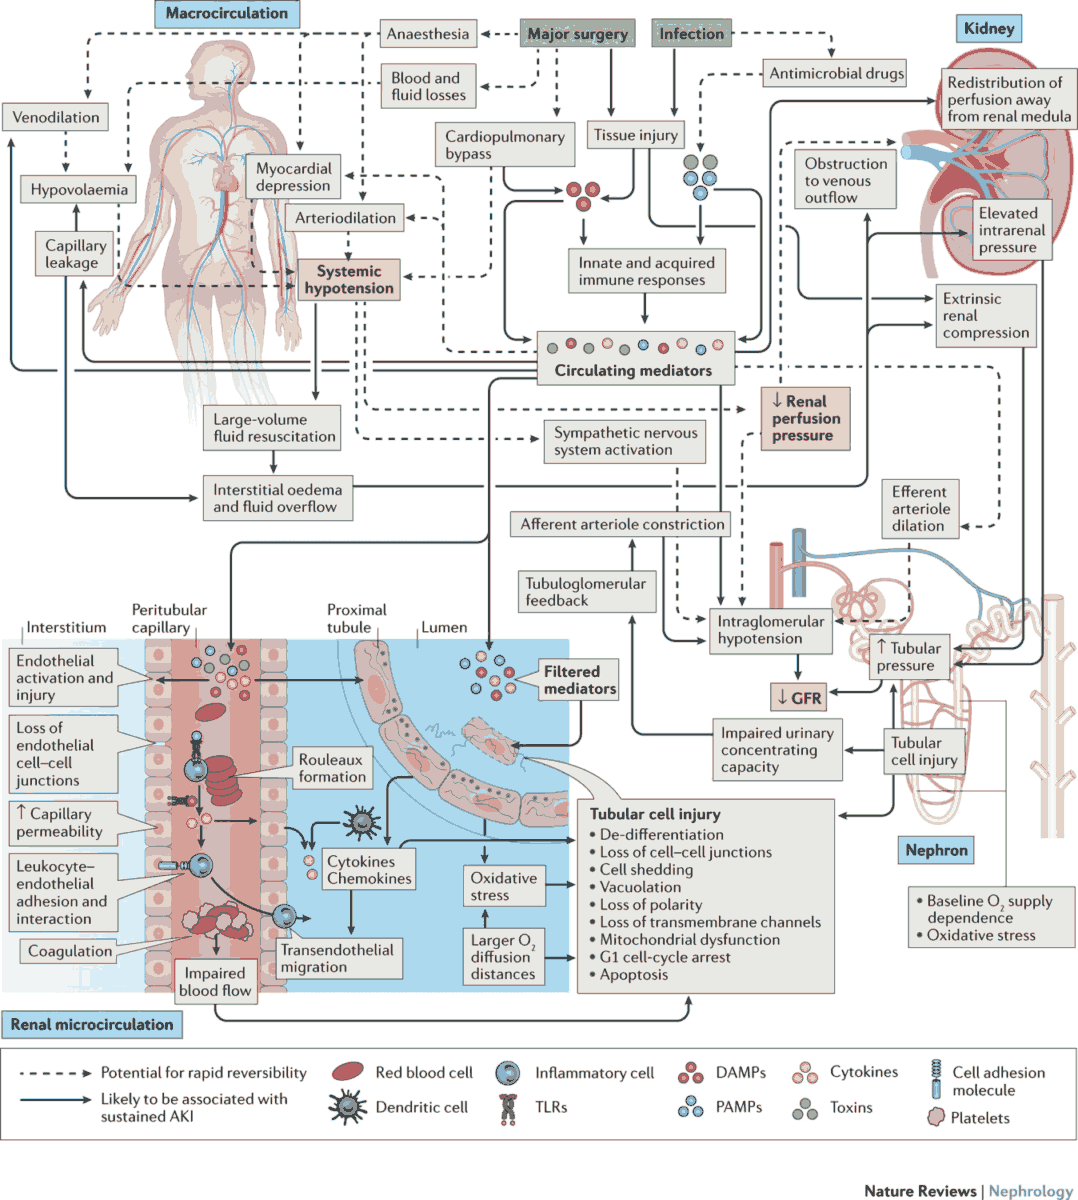 Principal Pathophysiologic Mechanisms of Acute Kidney Injury in the Context of Sepsis or Major Surgery